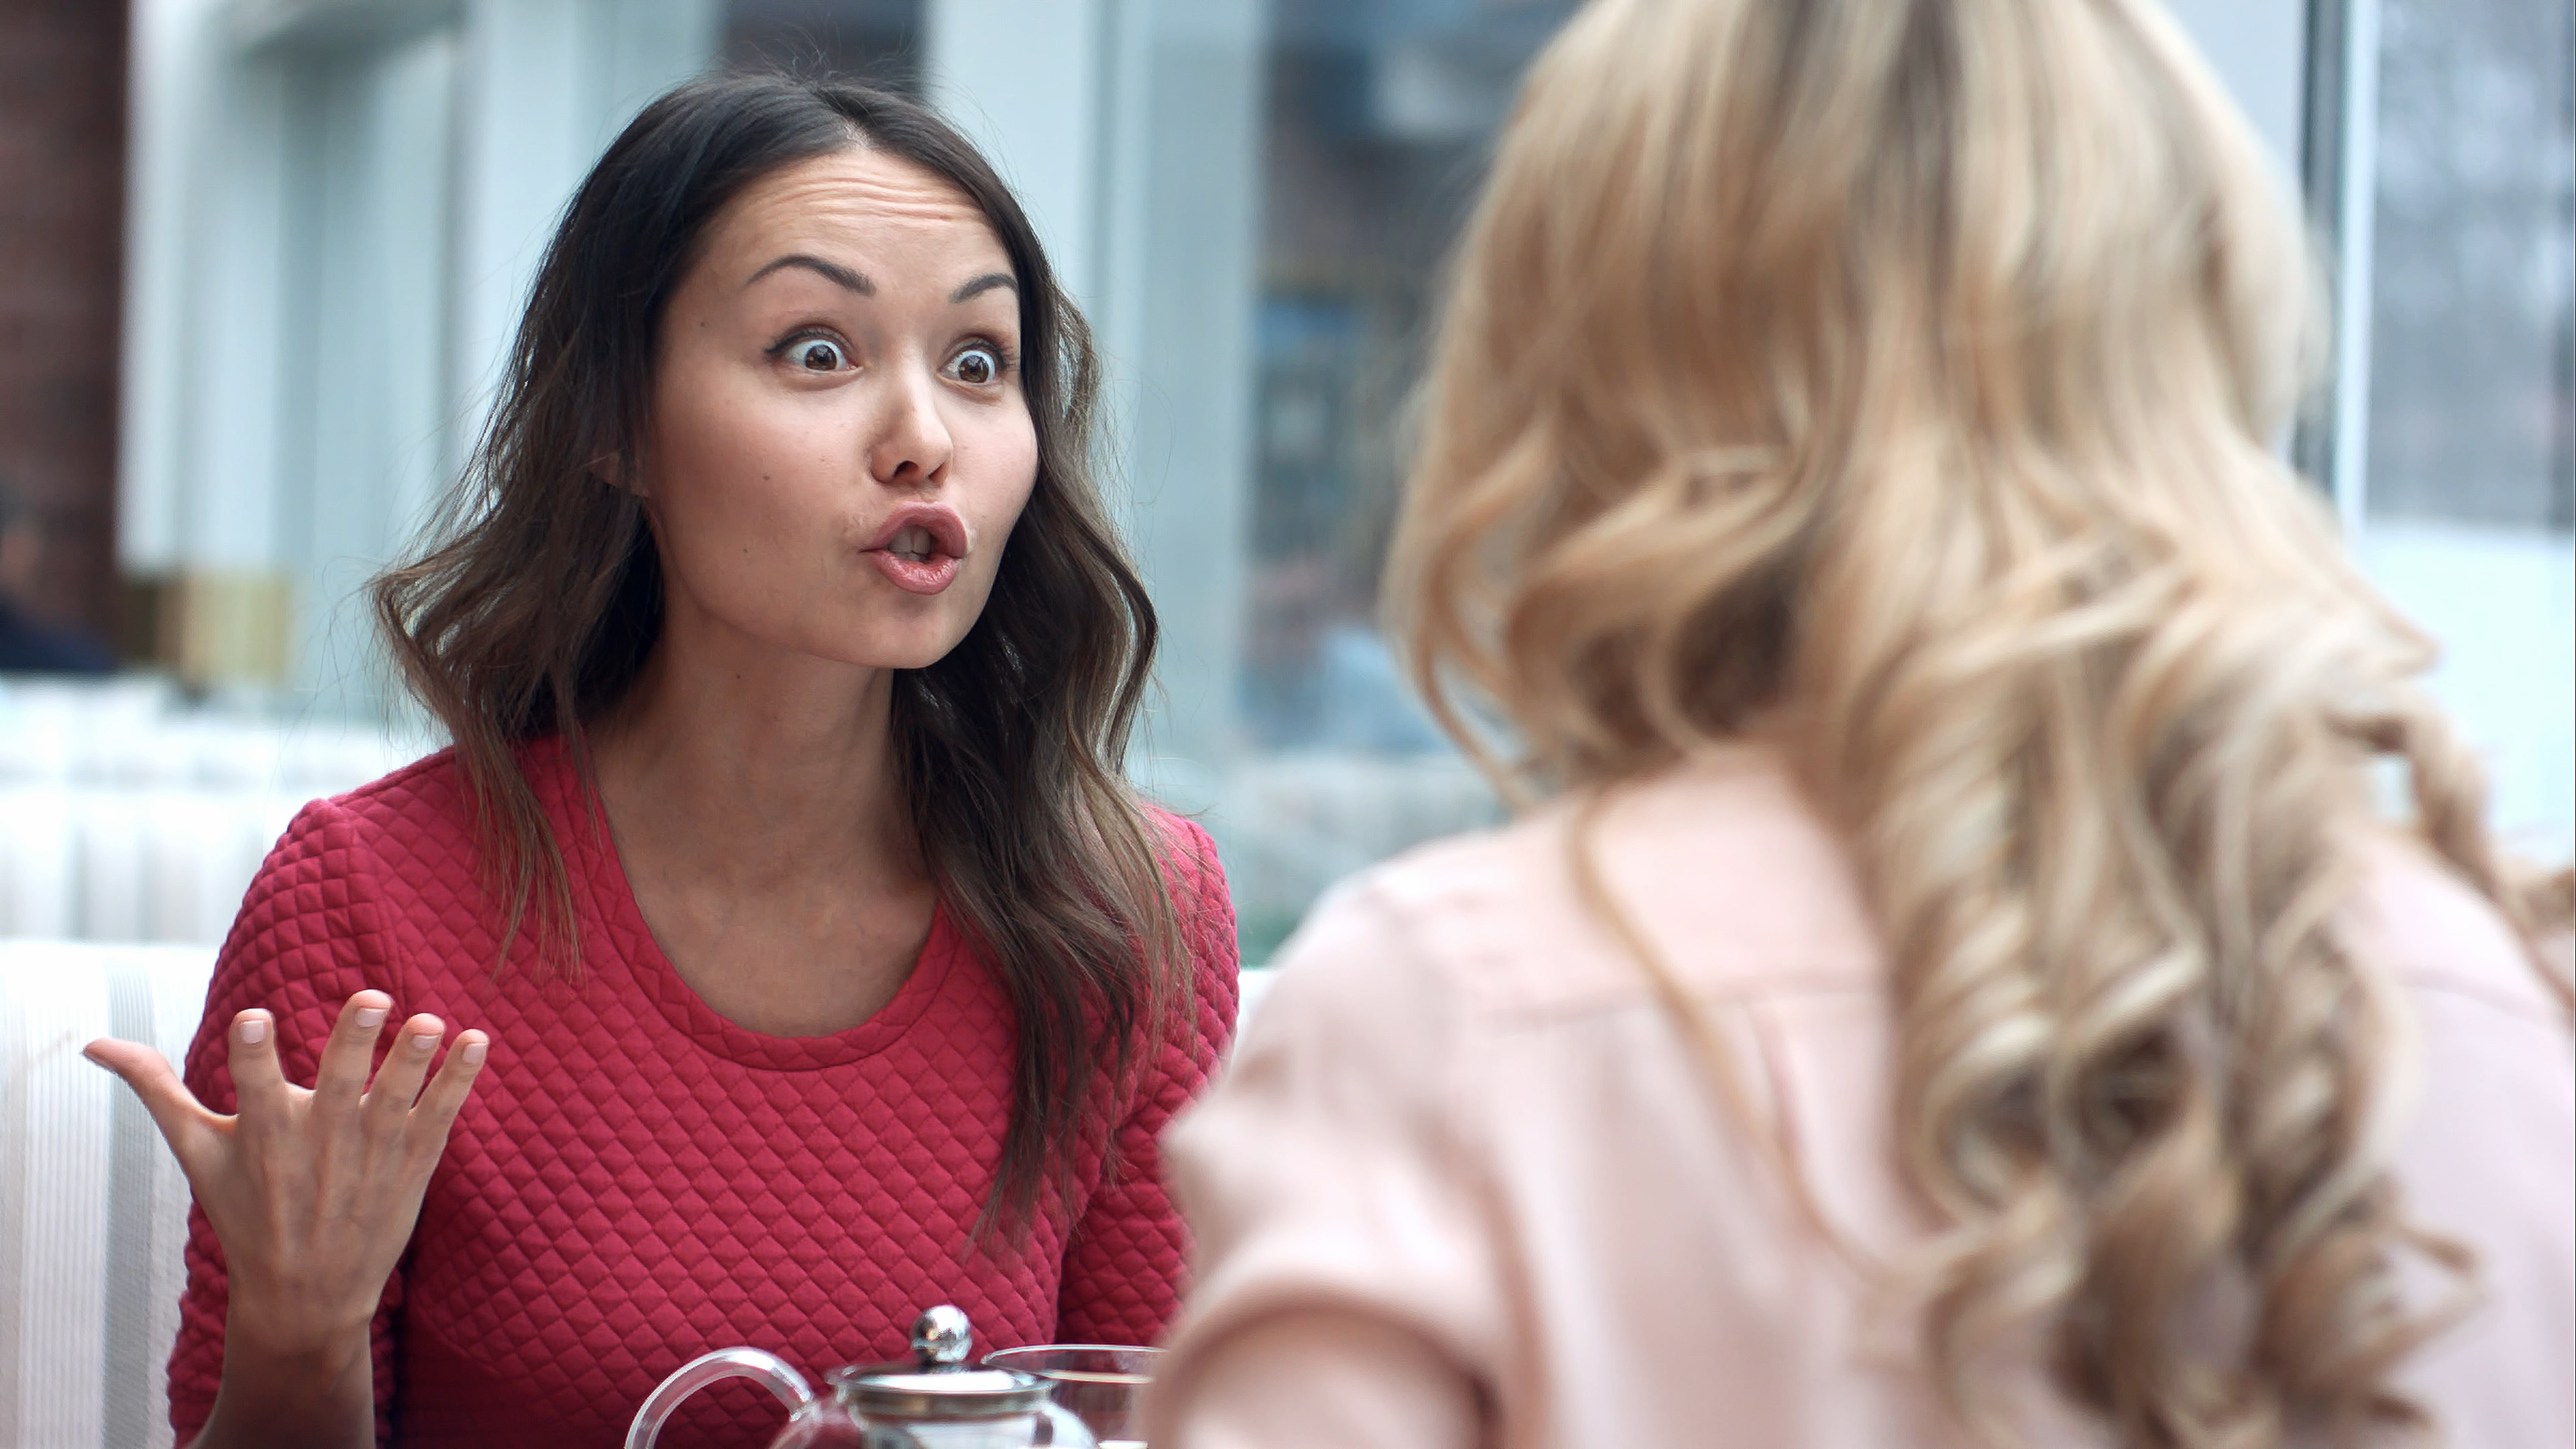 Two young women argue in a restaurant | Source: Shutterstock